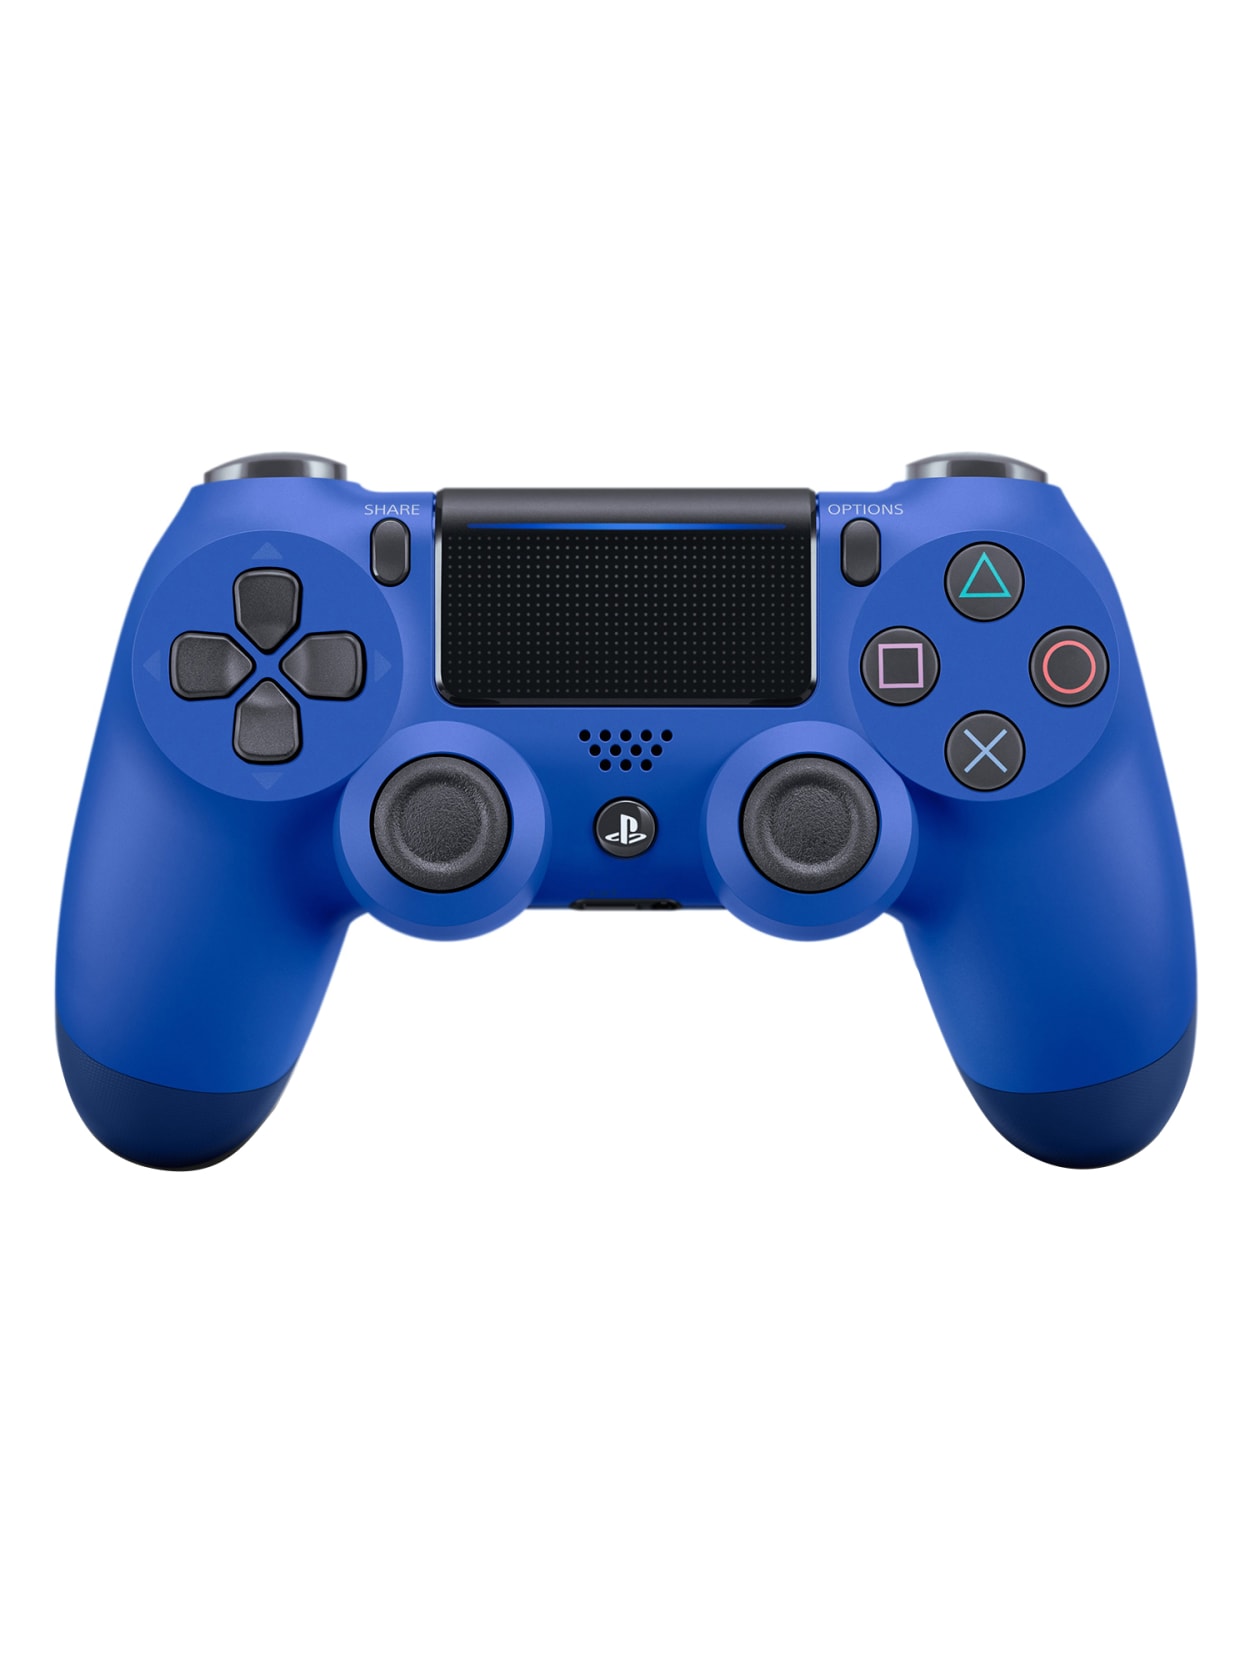 dualshock 4 wireless controller for playstation